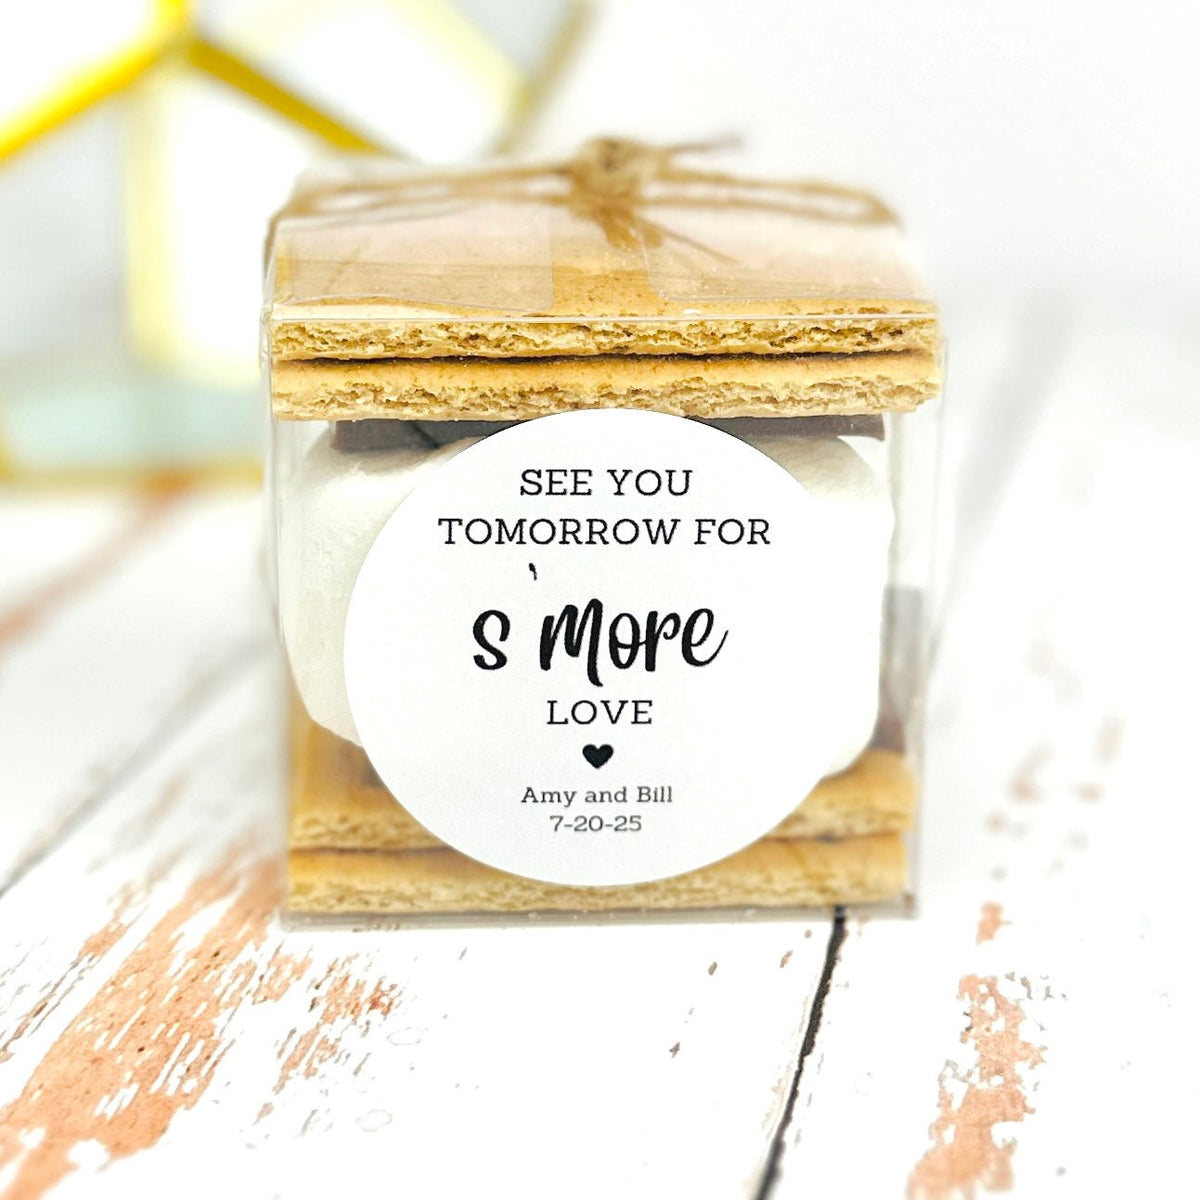 S'more Love In A Box - Forever Wedding Favors